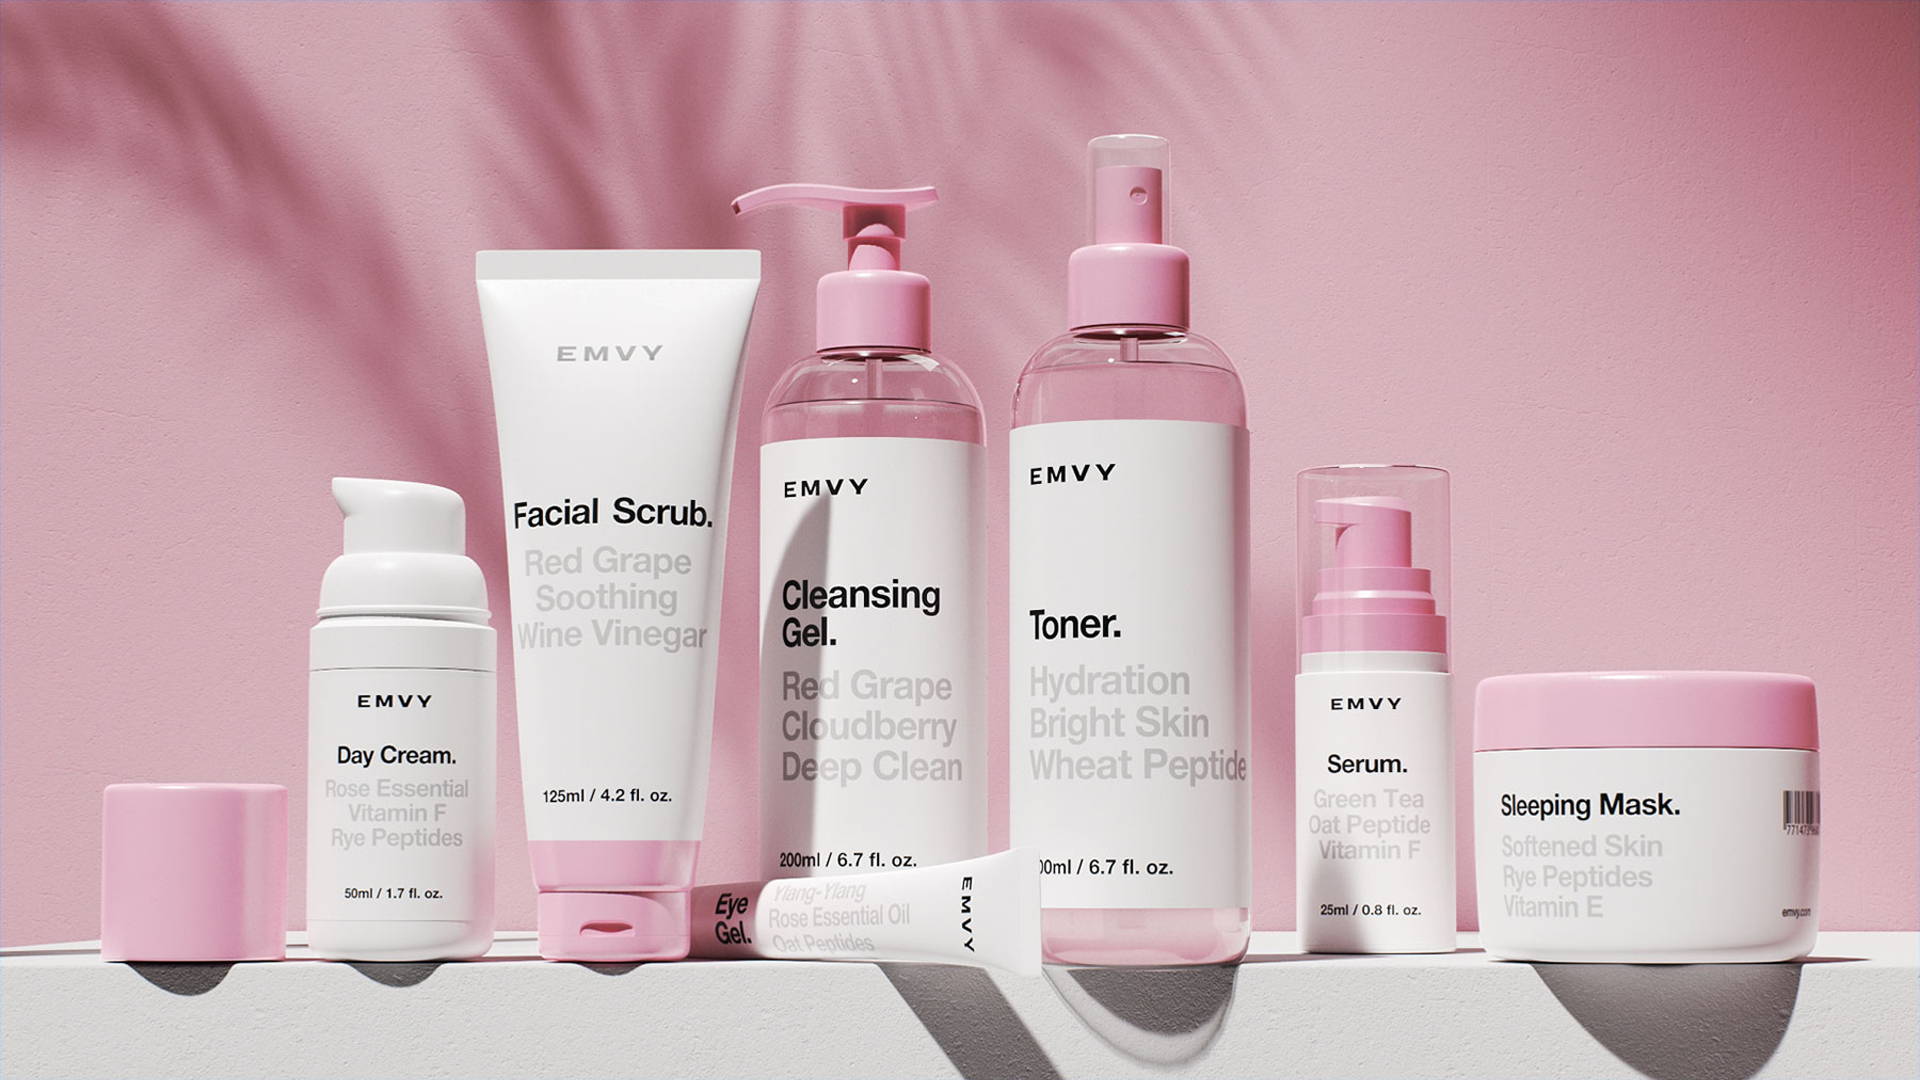 Featured image for EMVY Skincare Comes With a Clean Look